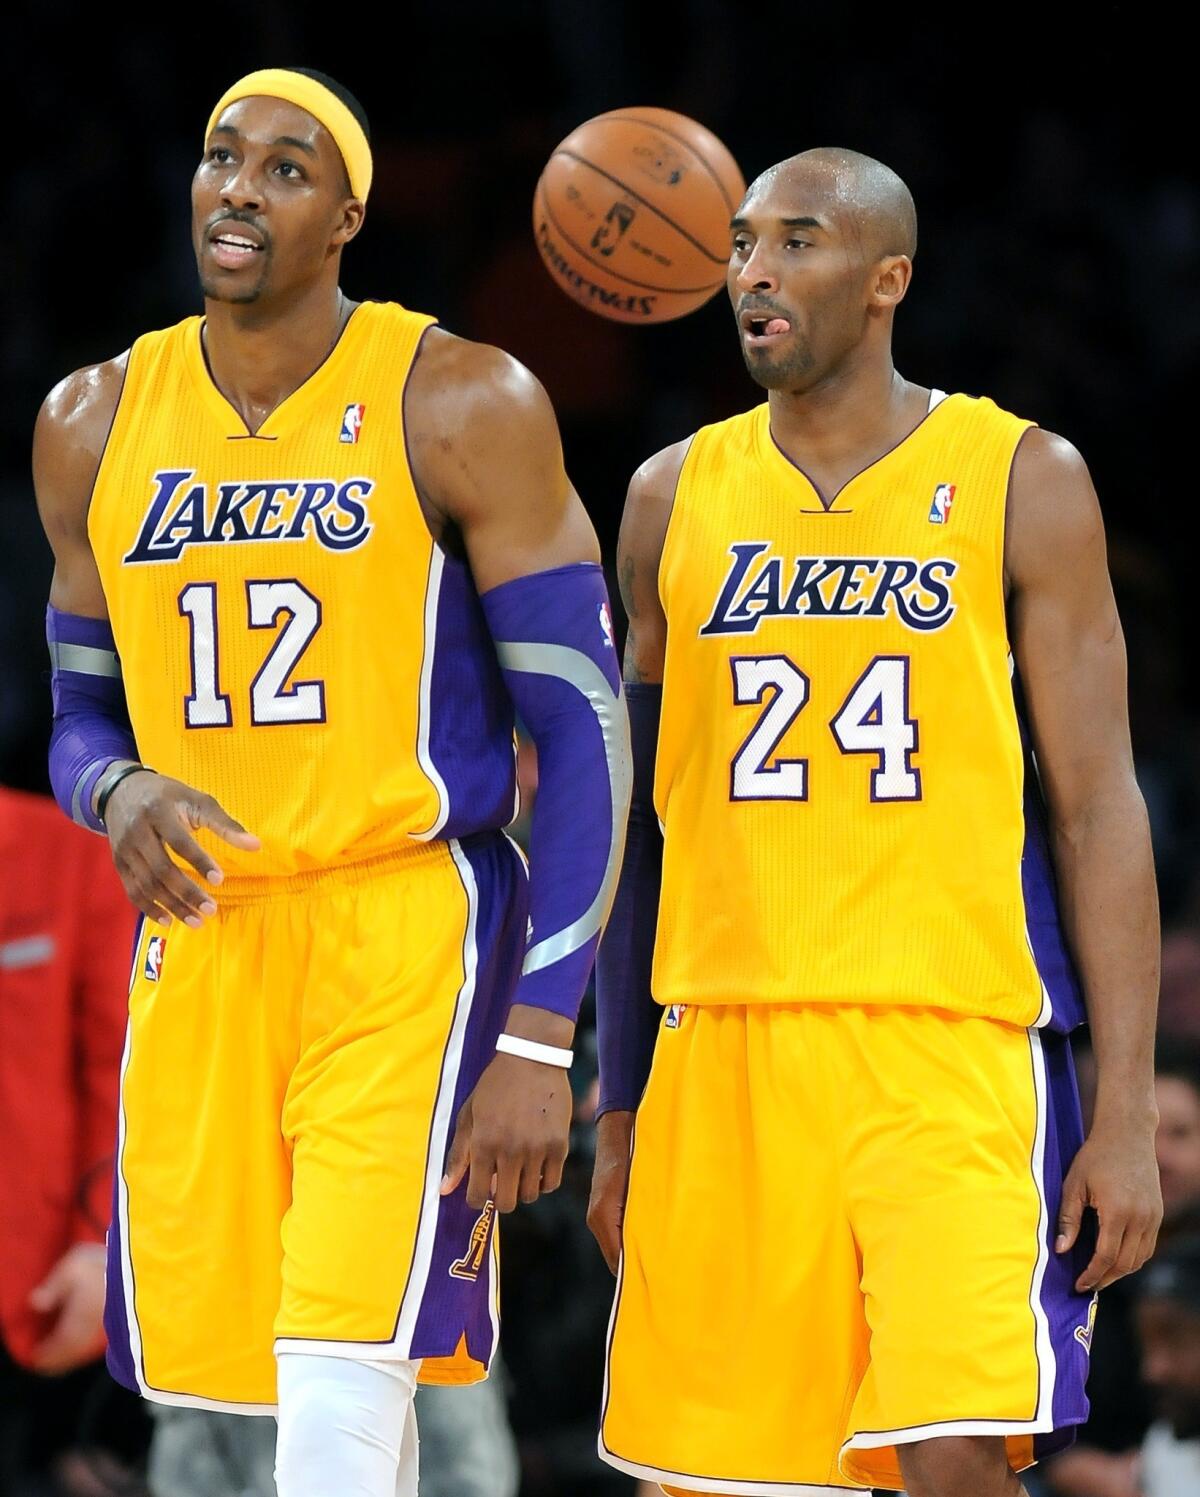 Dwight Howard, left, and Kobe Bryant walk off the court following a game against the Milwaukee Bucks in January. Howard didn't accomplish much in his one season with the Lakers.